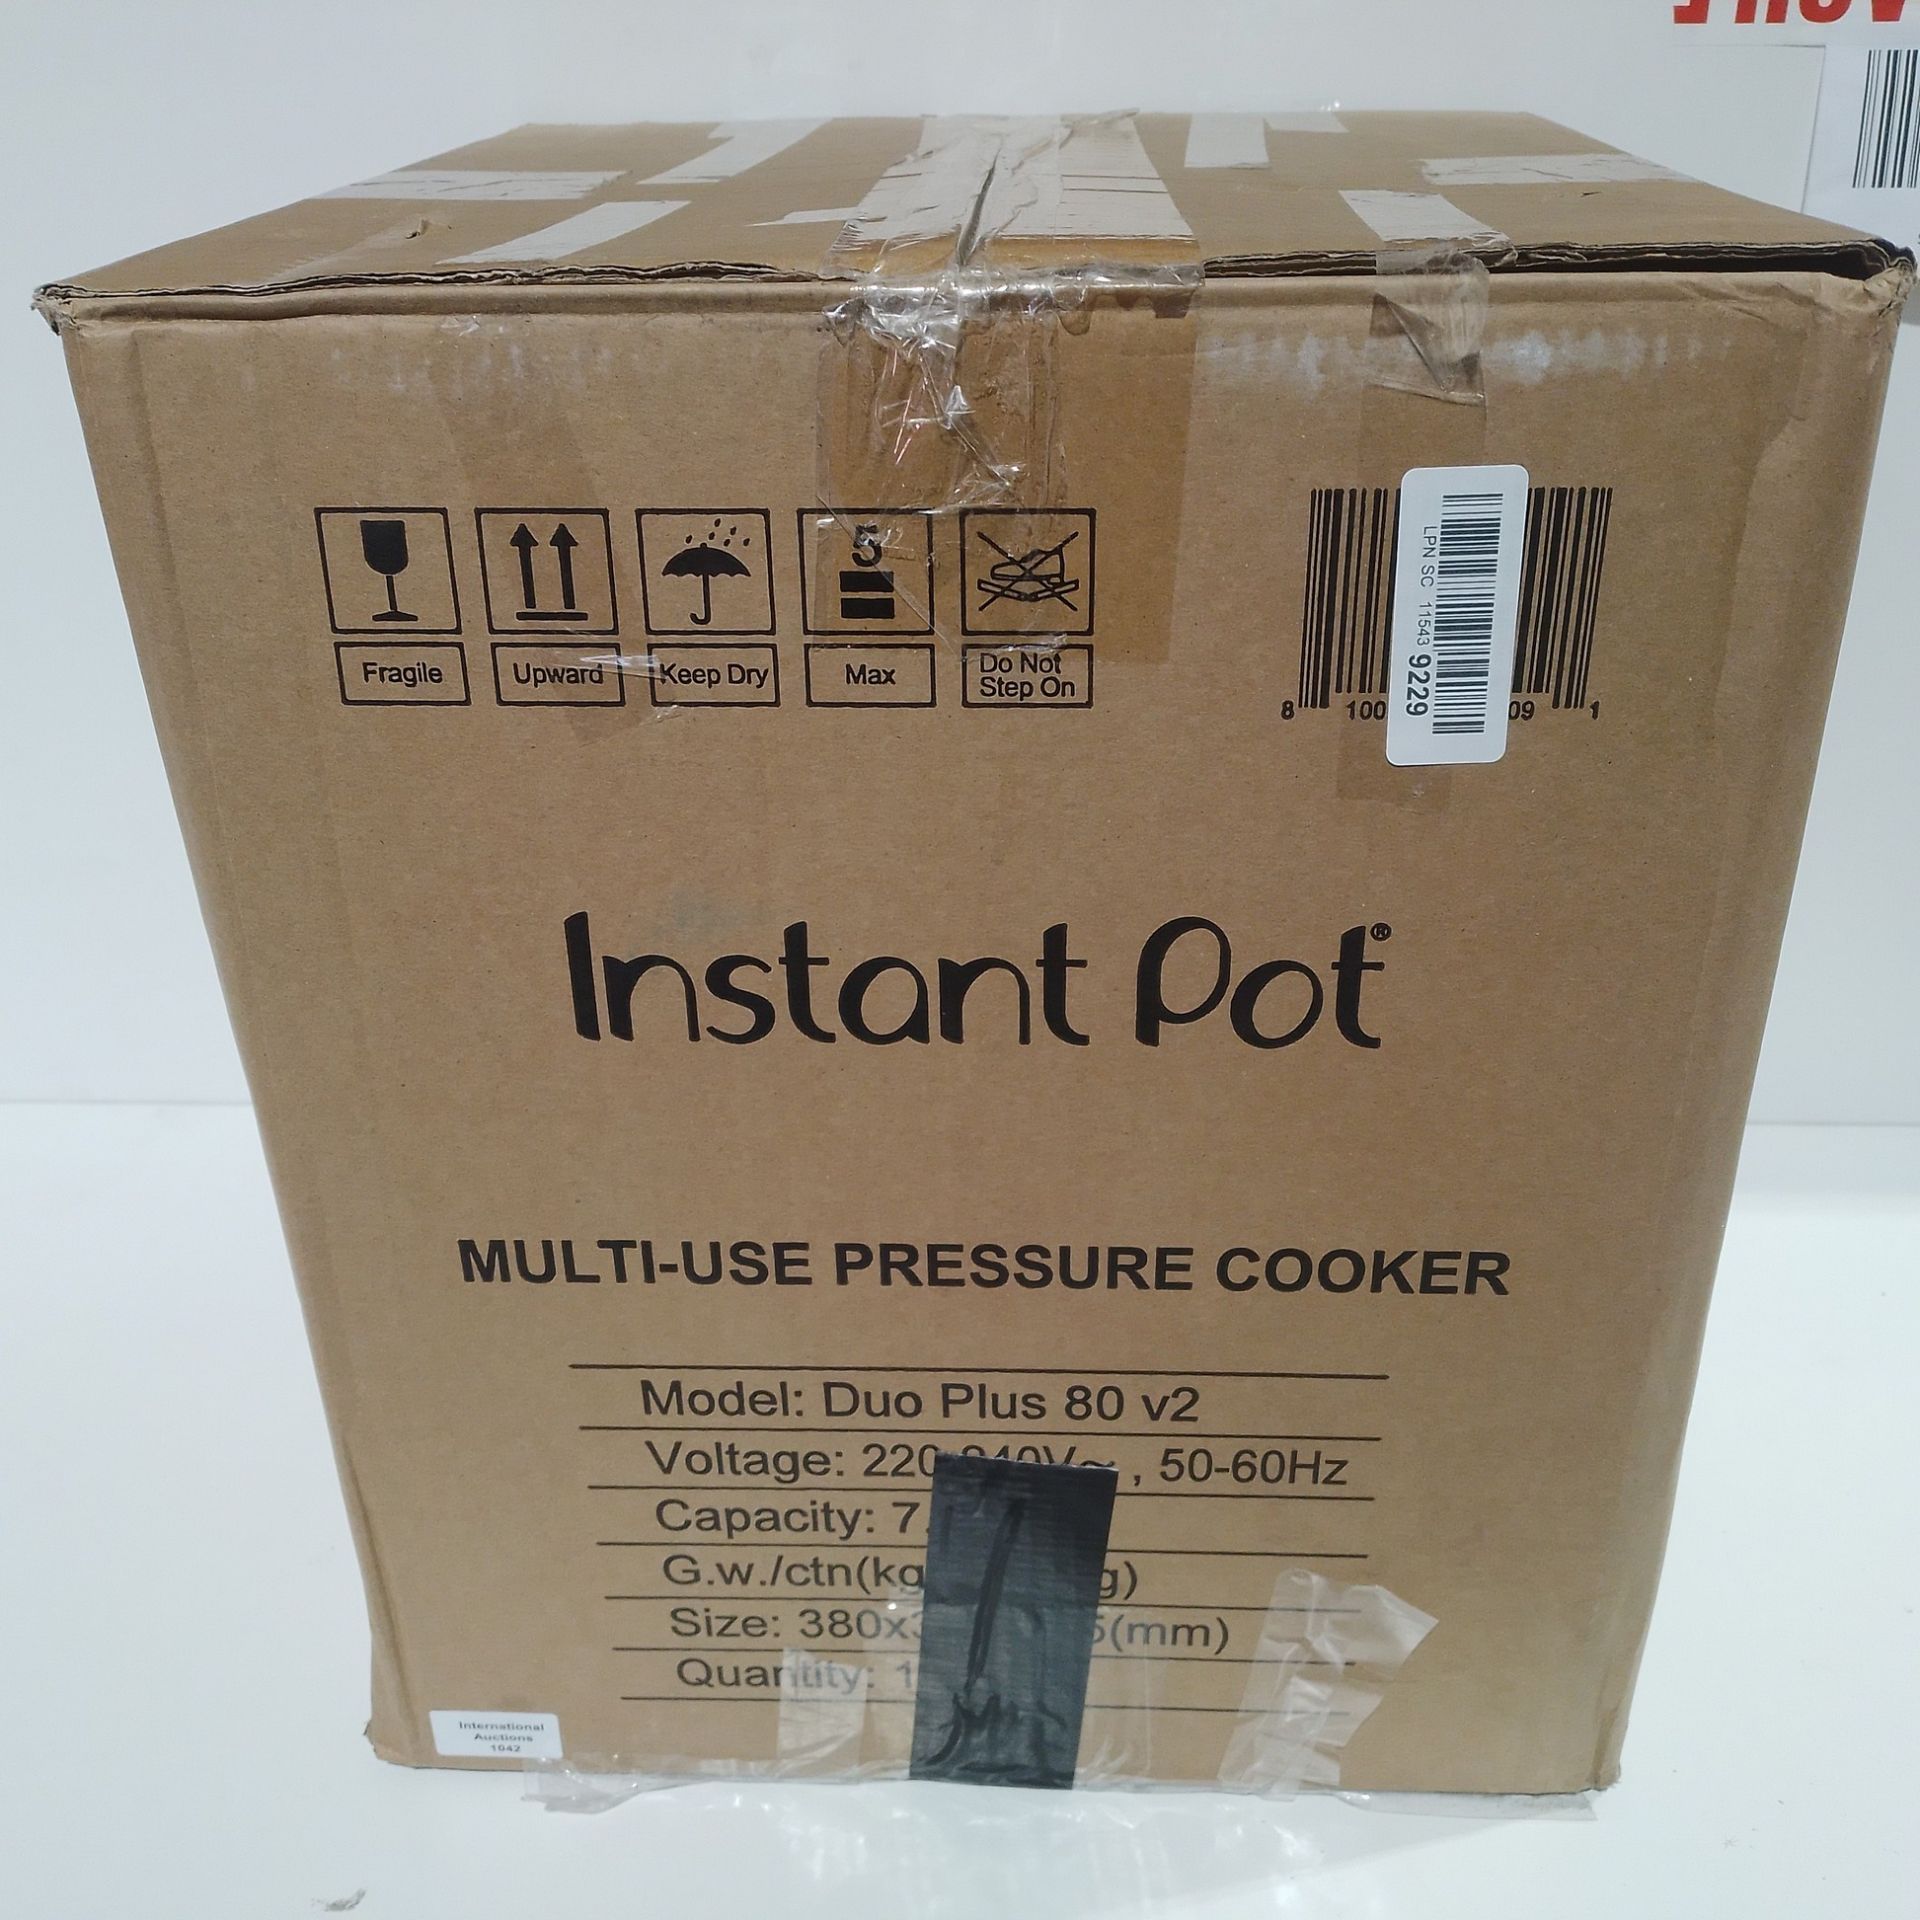 RRP £145.15 Instant Pot 9-in-1 Duo Plus 7.6L Electric Pressure Cooker. 15 Smart Programmes - Image 2 of 2